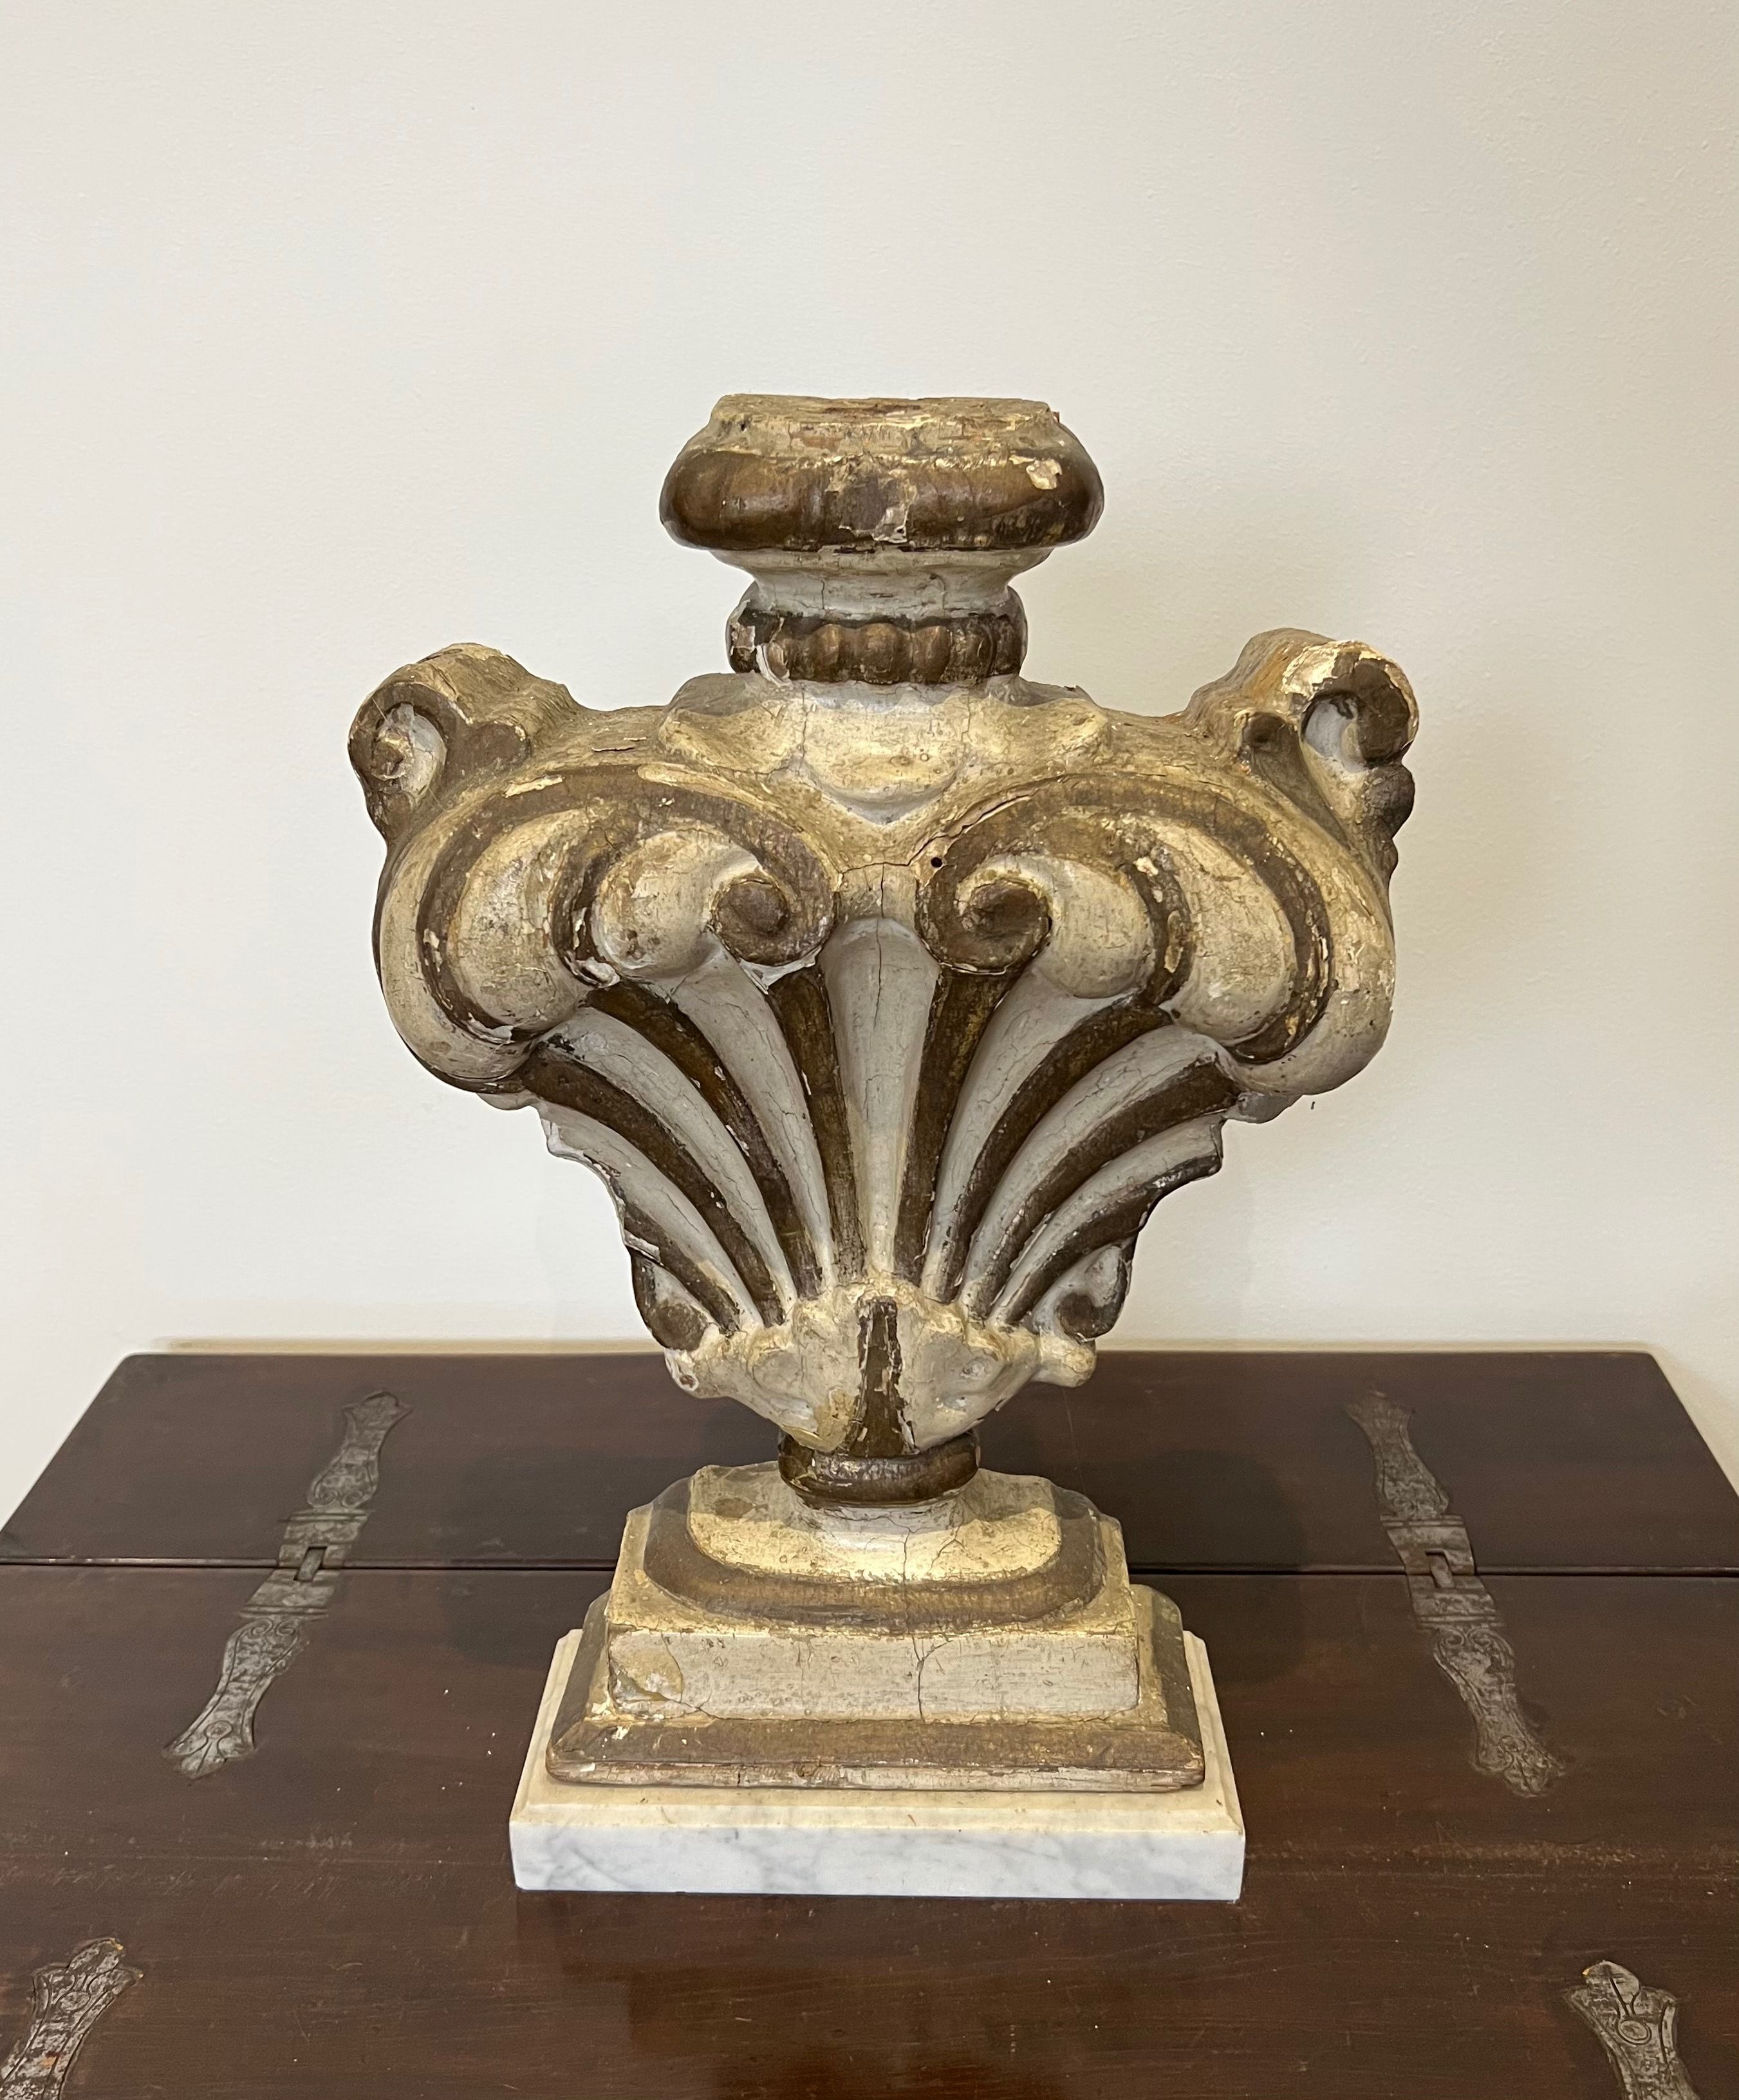 Decorative Carved Wood Element on a Marble Base. Italian work. 18th Century